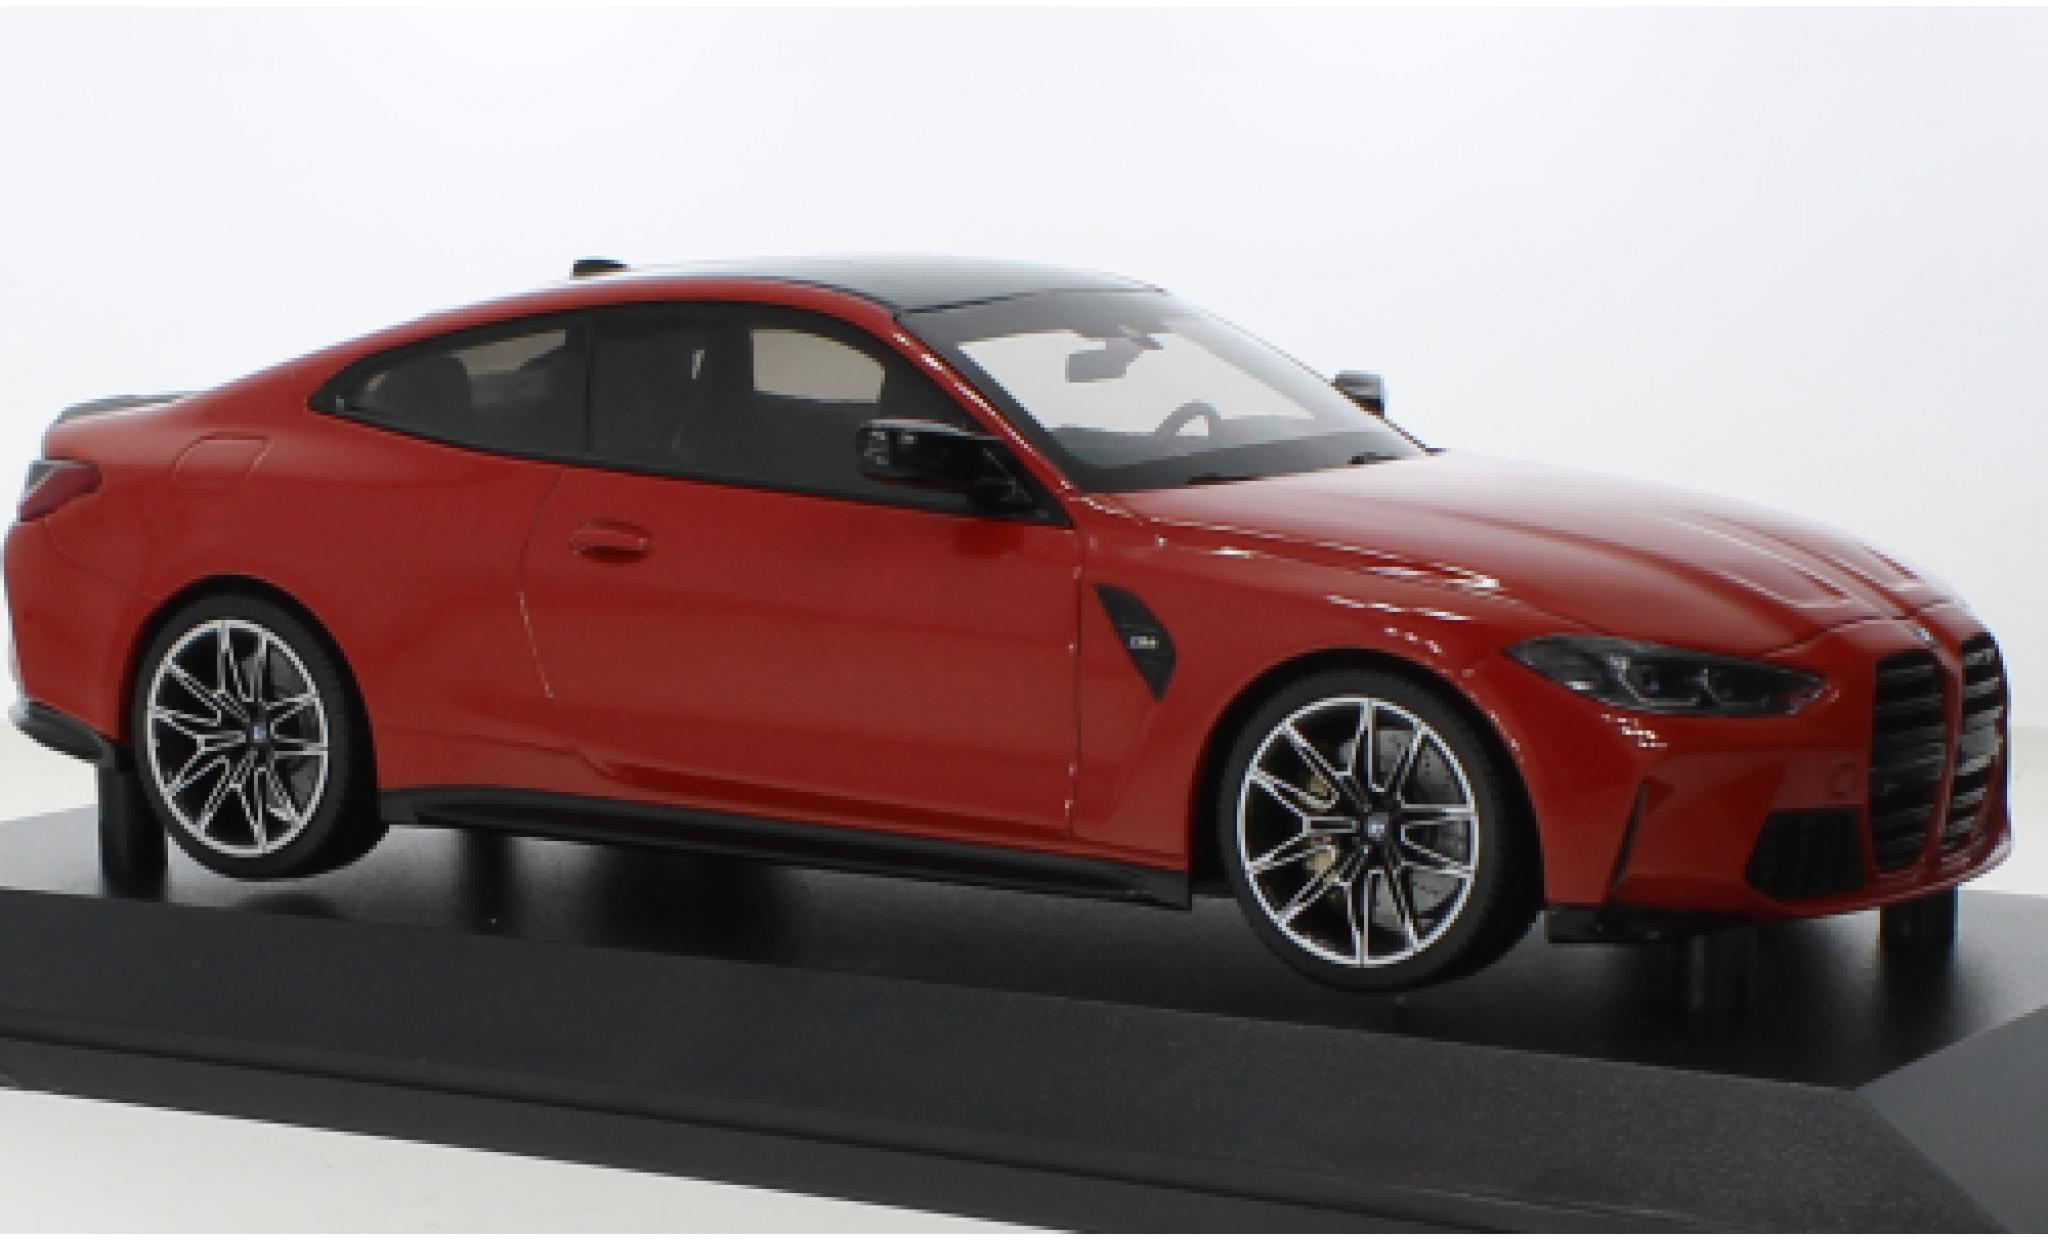 2020 BMW M4 Red Metallic with Carbon Top Limited Edition to 720 pieces  Worldwide 1/18 Diecast Model Car by Minichamps